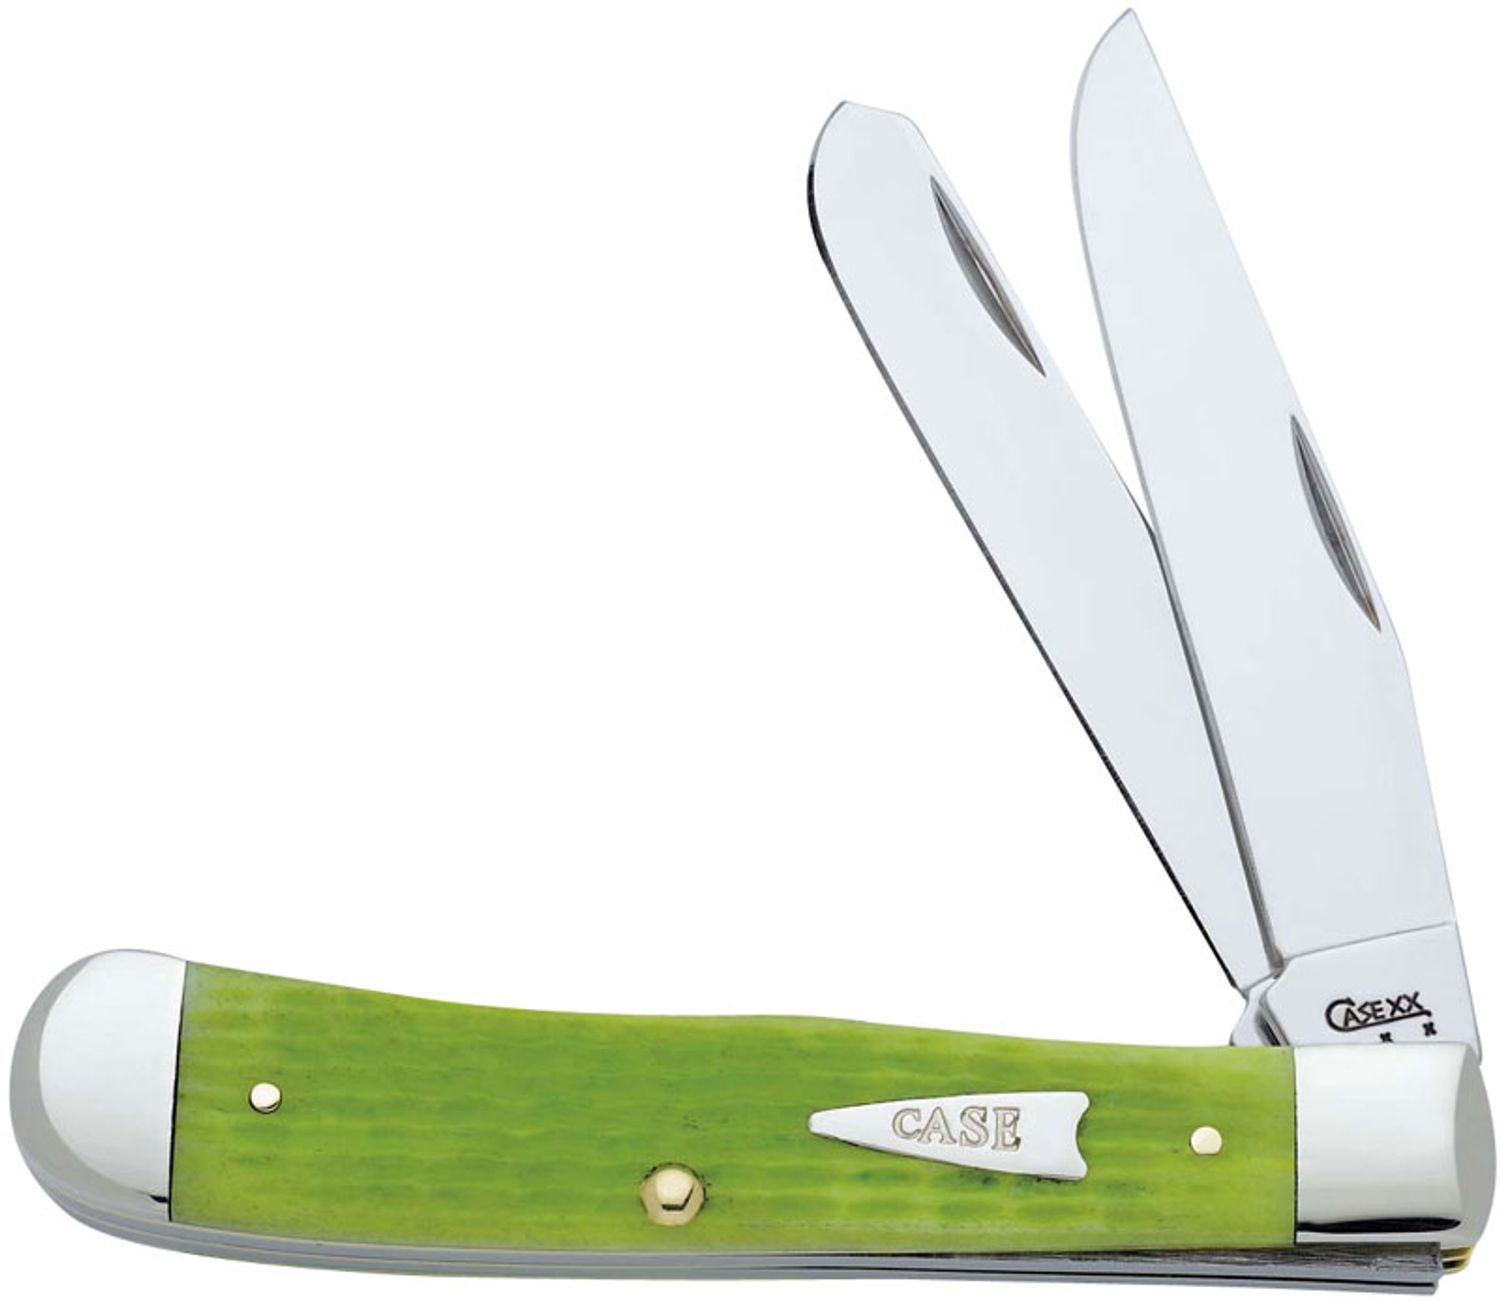 Case Key Lime Bone Trapper 4-1/8 Closed (6254 SS) - KnifeCenter - CA9114 -  Discontinued